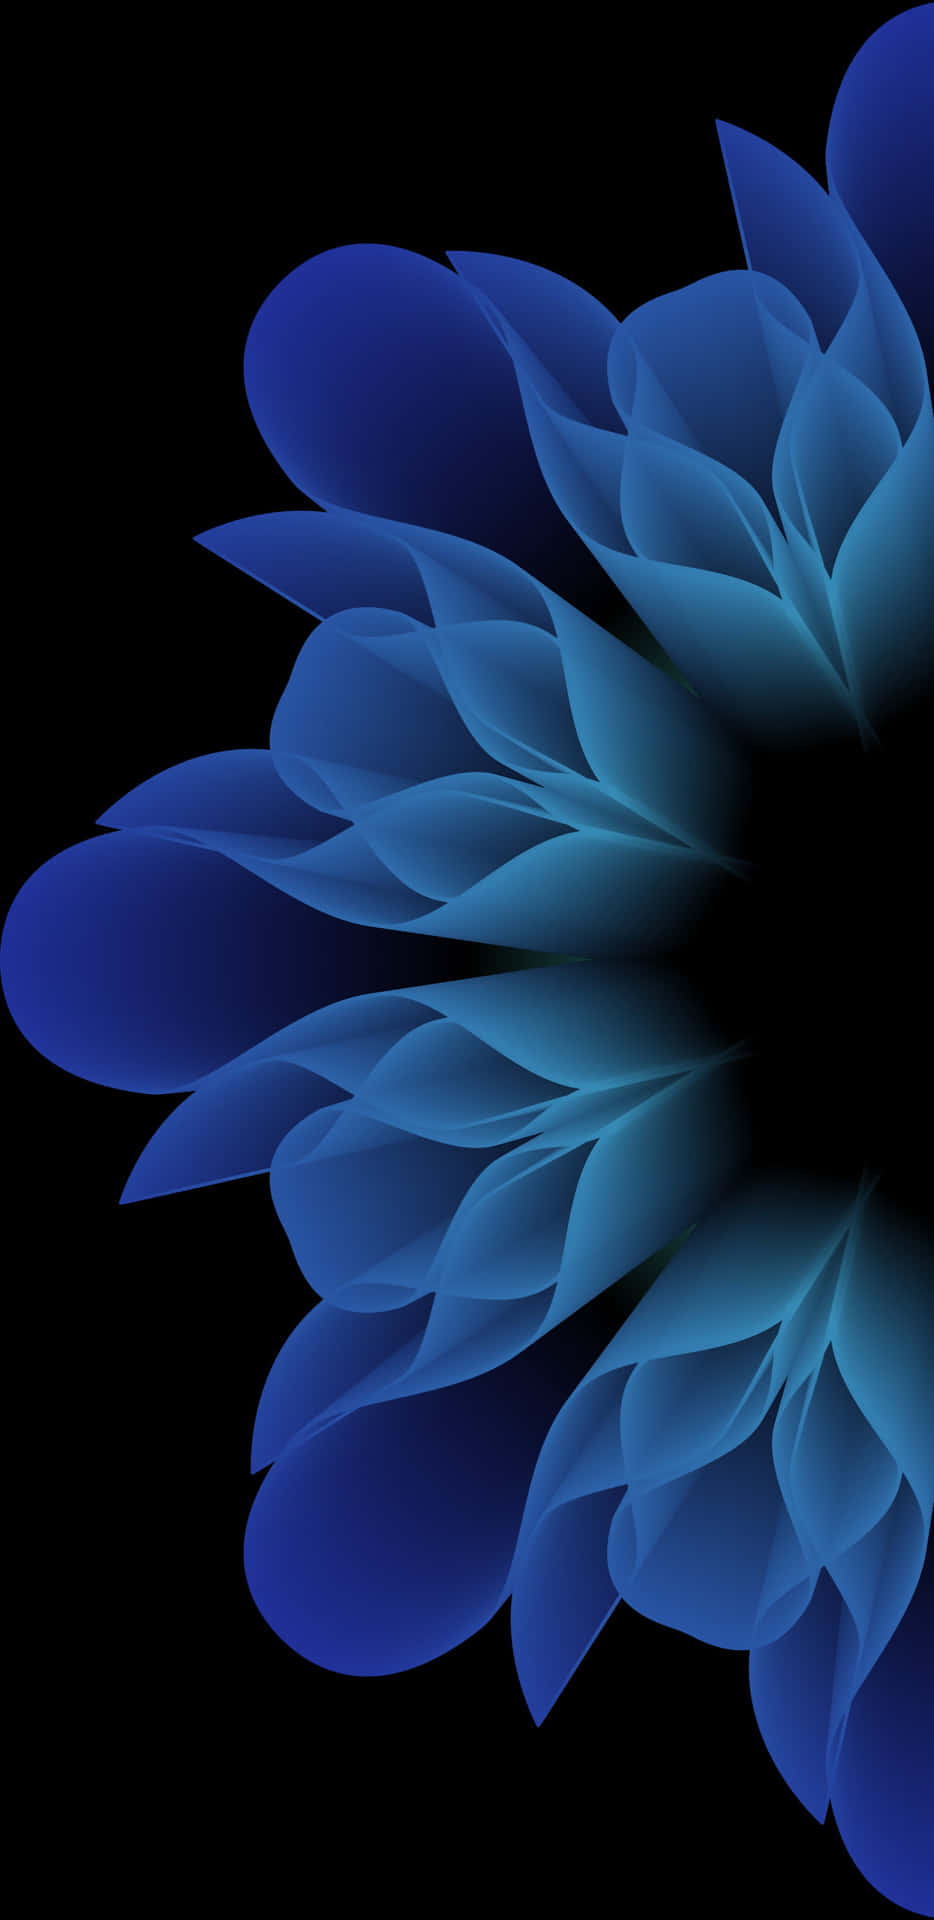 A Blue Flower With A Black Background